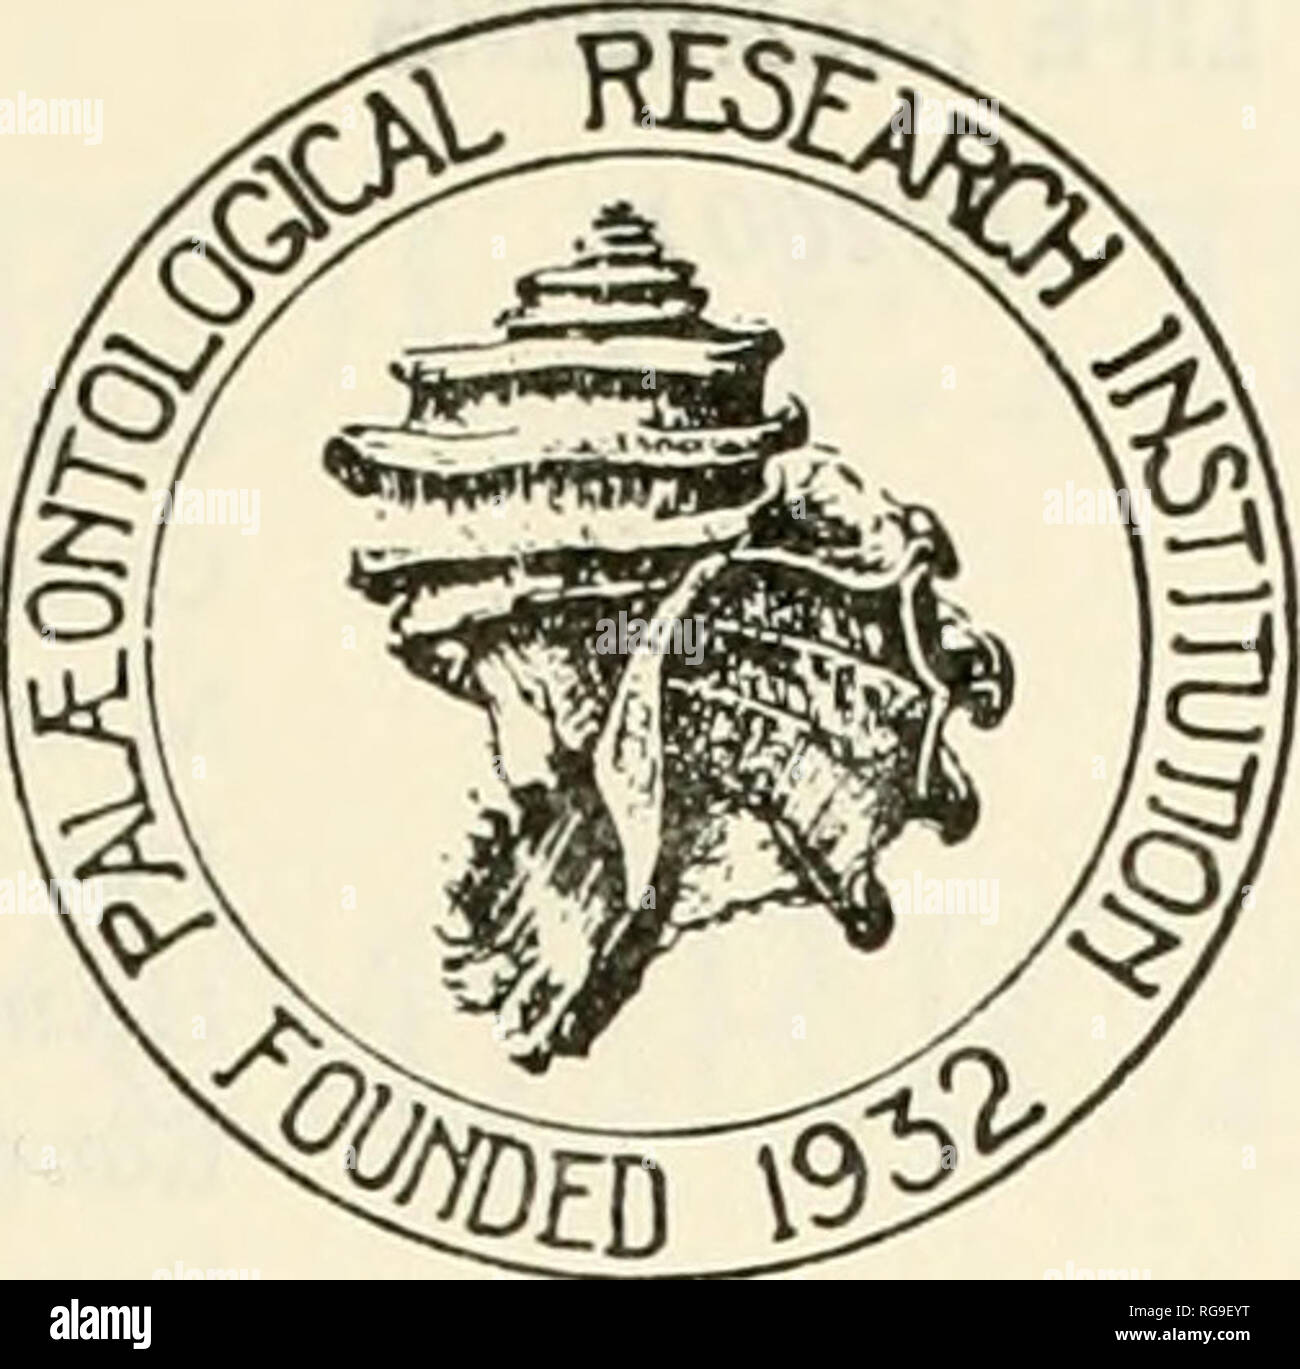 . Bulletins of American paleontology. . The Paleontological Research Institution acknowledges with special thanks the contributions of the following individuals and institutions ($1000 or more at James A. Allen (1967) Armand L. Adams (1976) Atlantic Richfield Company (1978) Miss Ethel Z. Bailey (1970) Christina L. Balk (1970) Mr. &amp; Mrs. Kenneth E. Caster (1967 Chevron Oil Company (1978) Exxon Company (1977 to date) Lois S. Fogelsanger (1966) Gulf Oil Corporation (1978) Merrill W. Haas (1975) Miss Rebecca S. Harris (1967) American Oil Company (1976) PATRONS the discretion of the contributor Stock Photo